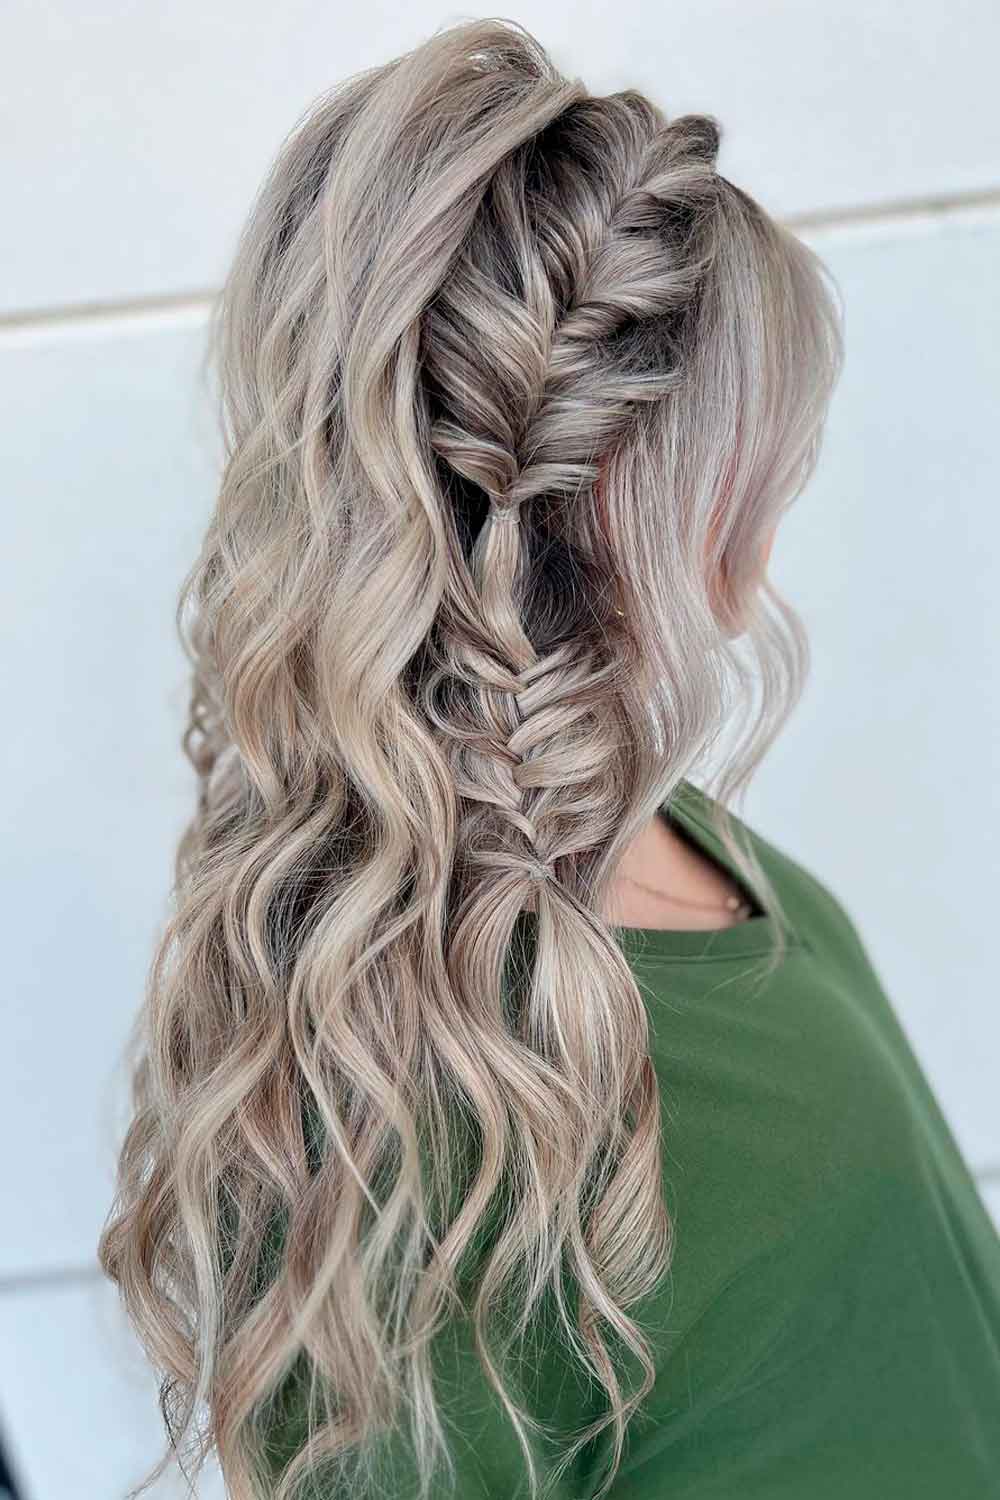 Hairstyles For Long Hair With Braids